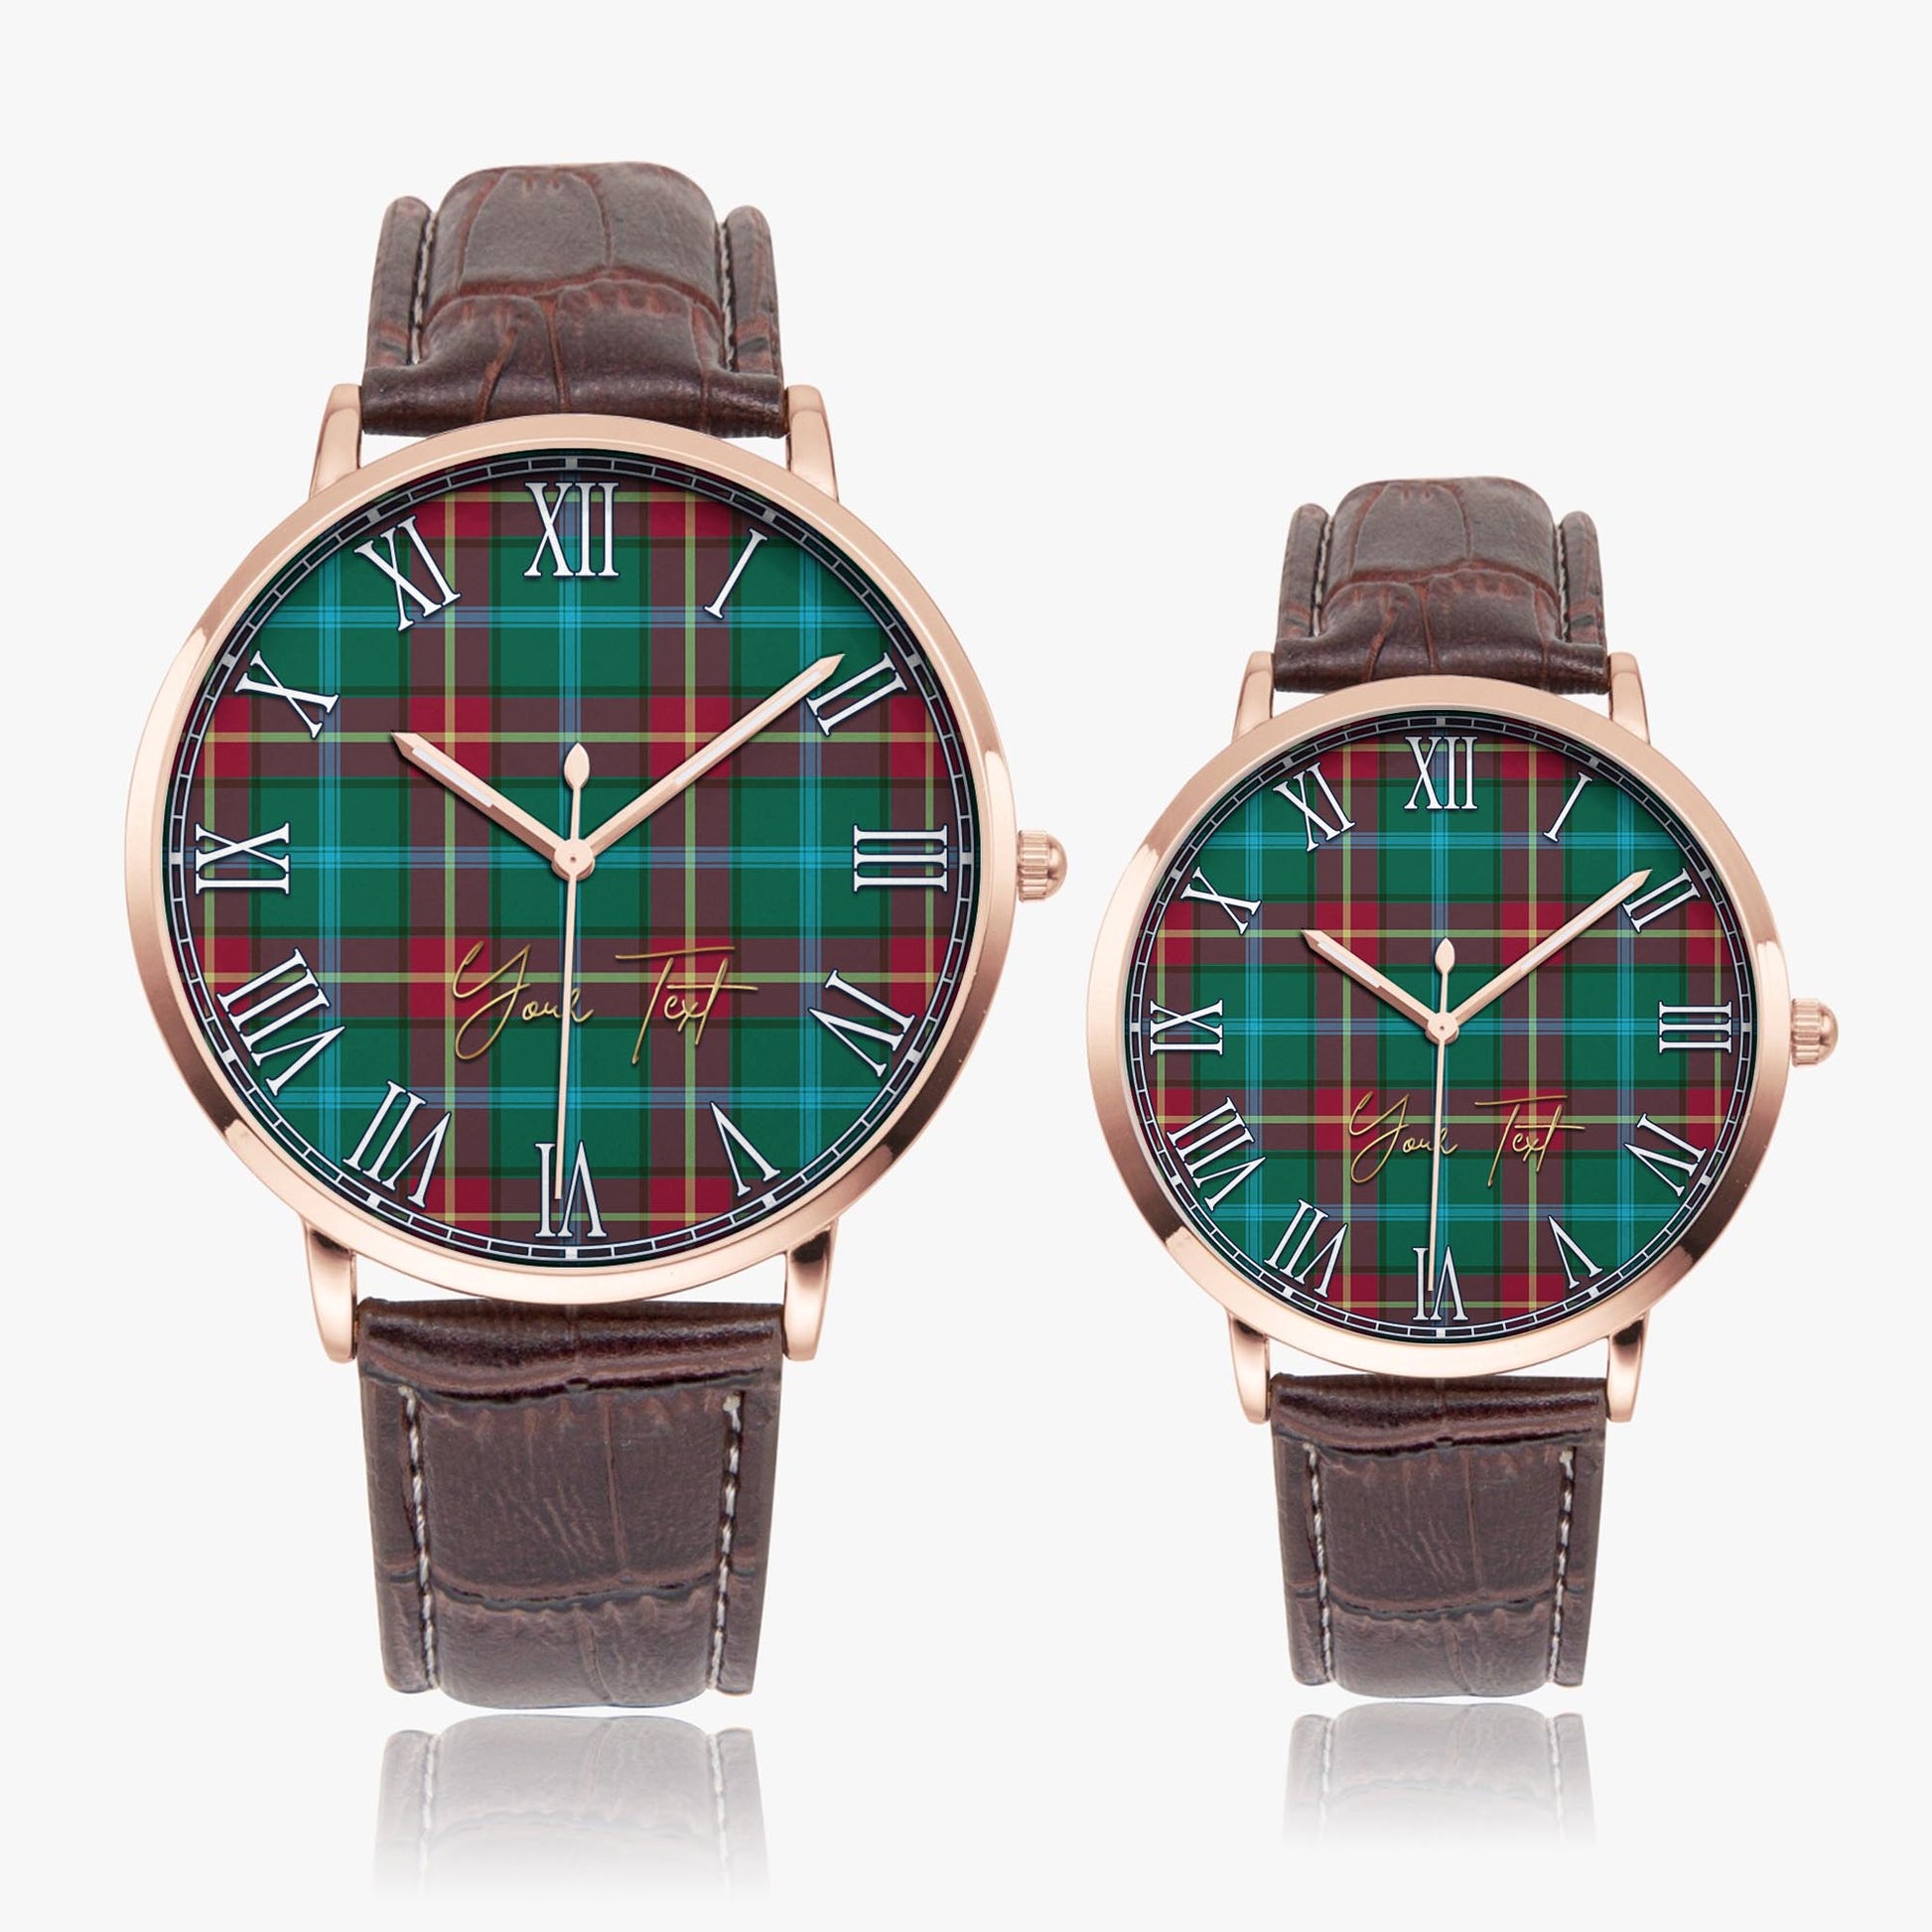 Manitoba Province Canada Tartan Personalized Your Text Leather Trap Quartz Watch Ultra Thin Rose Gold Case With Brown Leather Strap - Tartanvibesclothing